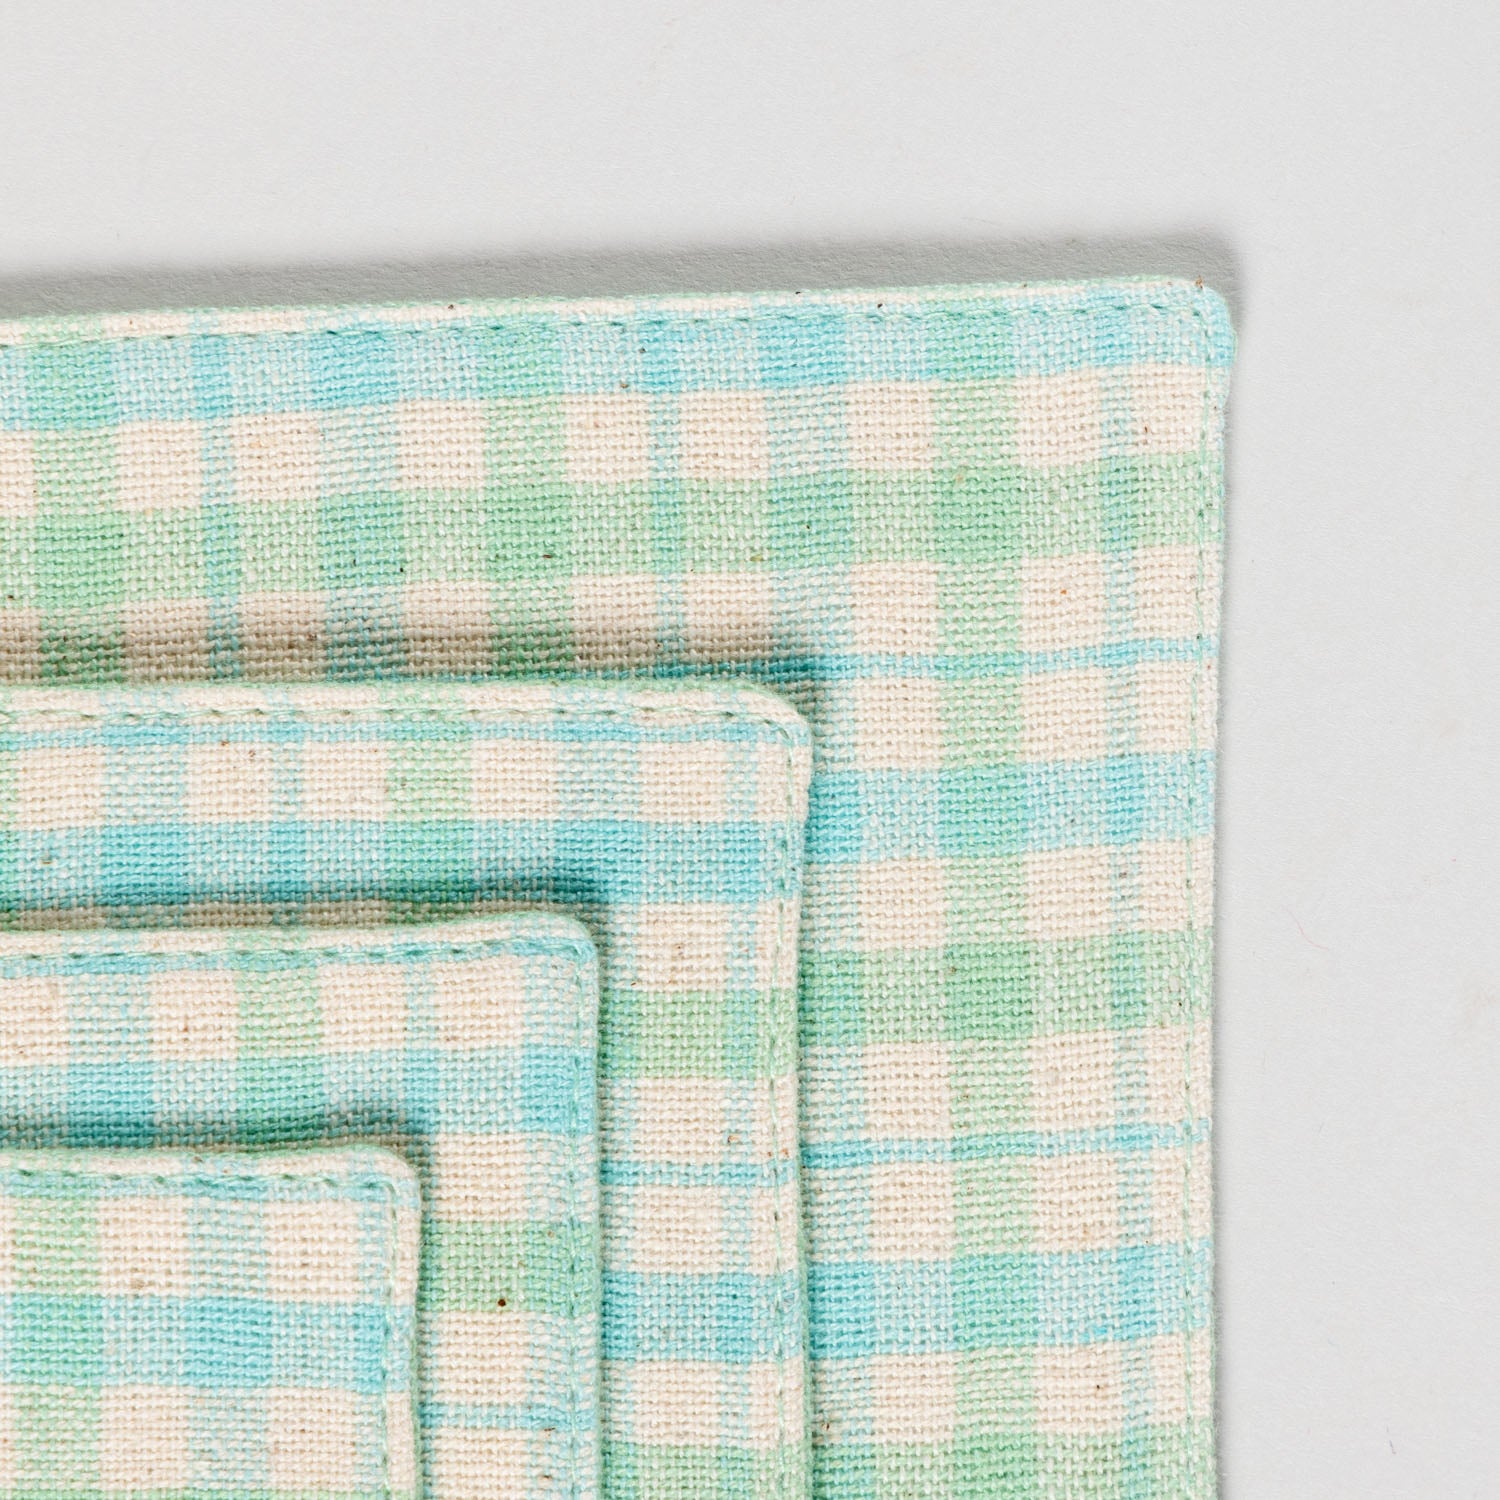 Hand Woven Blue/Green Fabric Coasters Set of 4 - 4x4